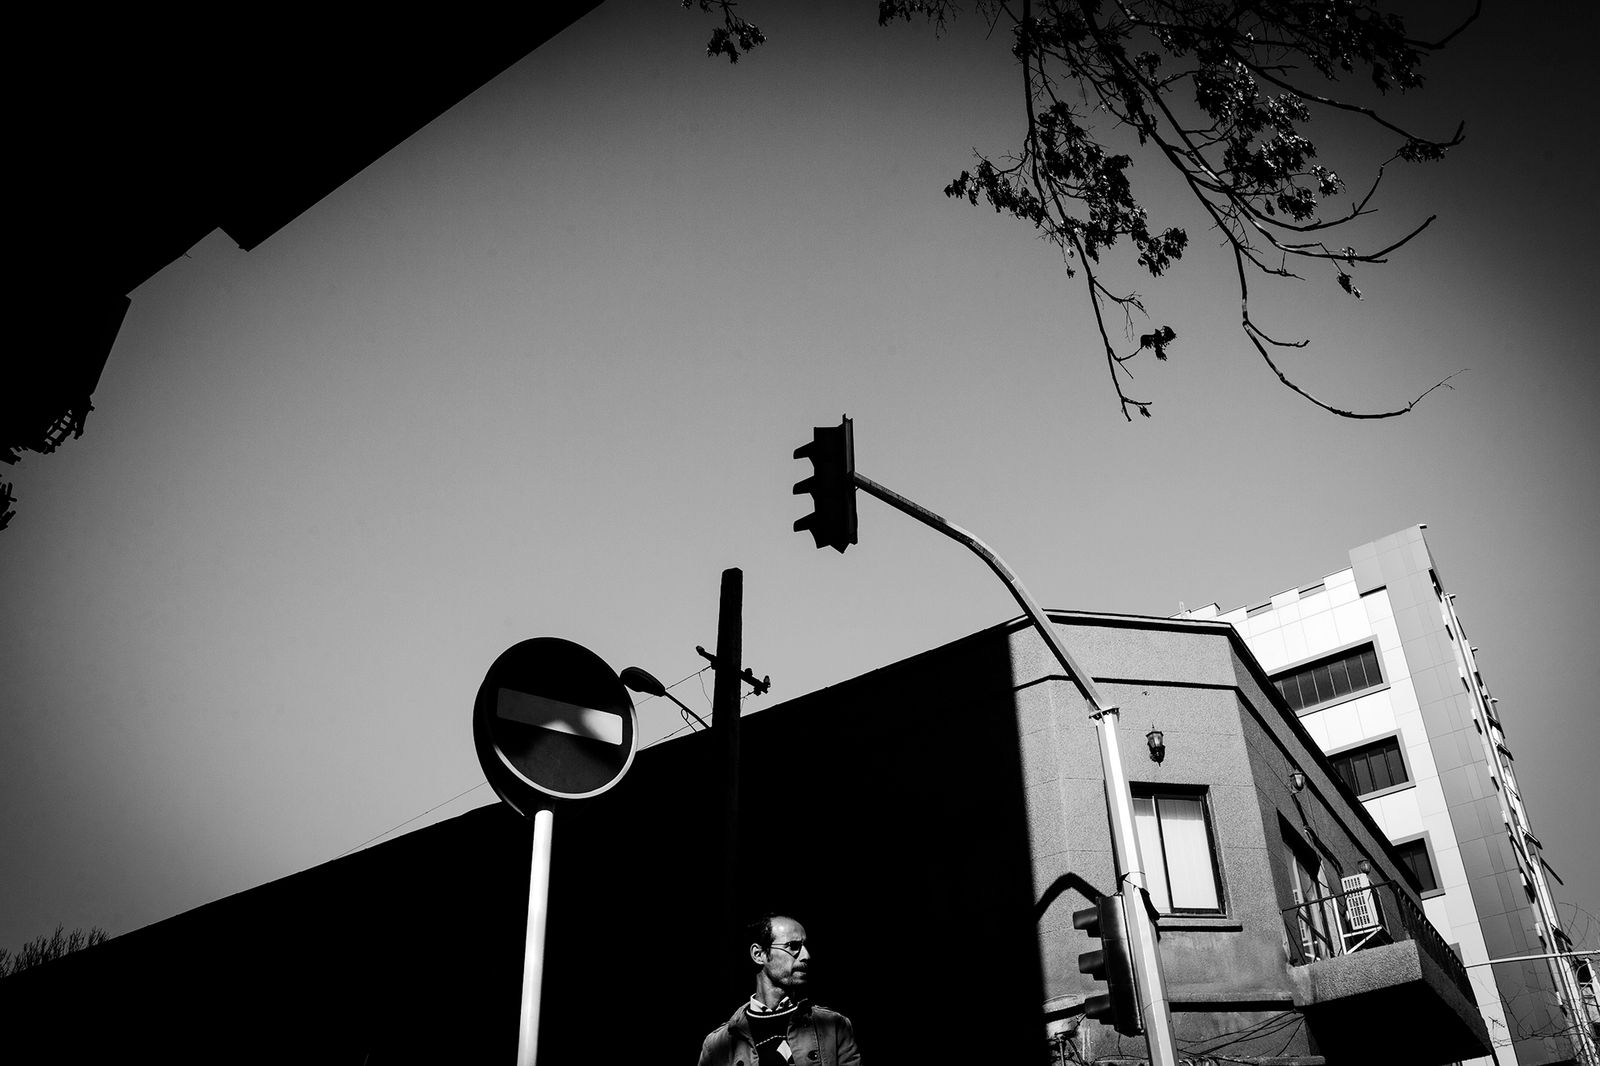 © Foad Ashtari - Image from the Lights and Shades of my city photography project